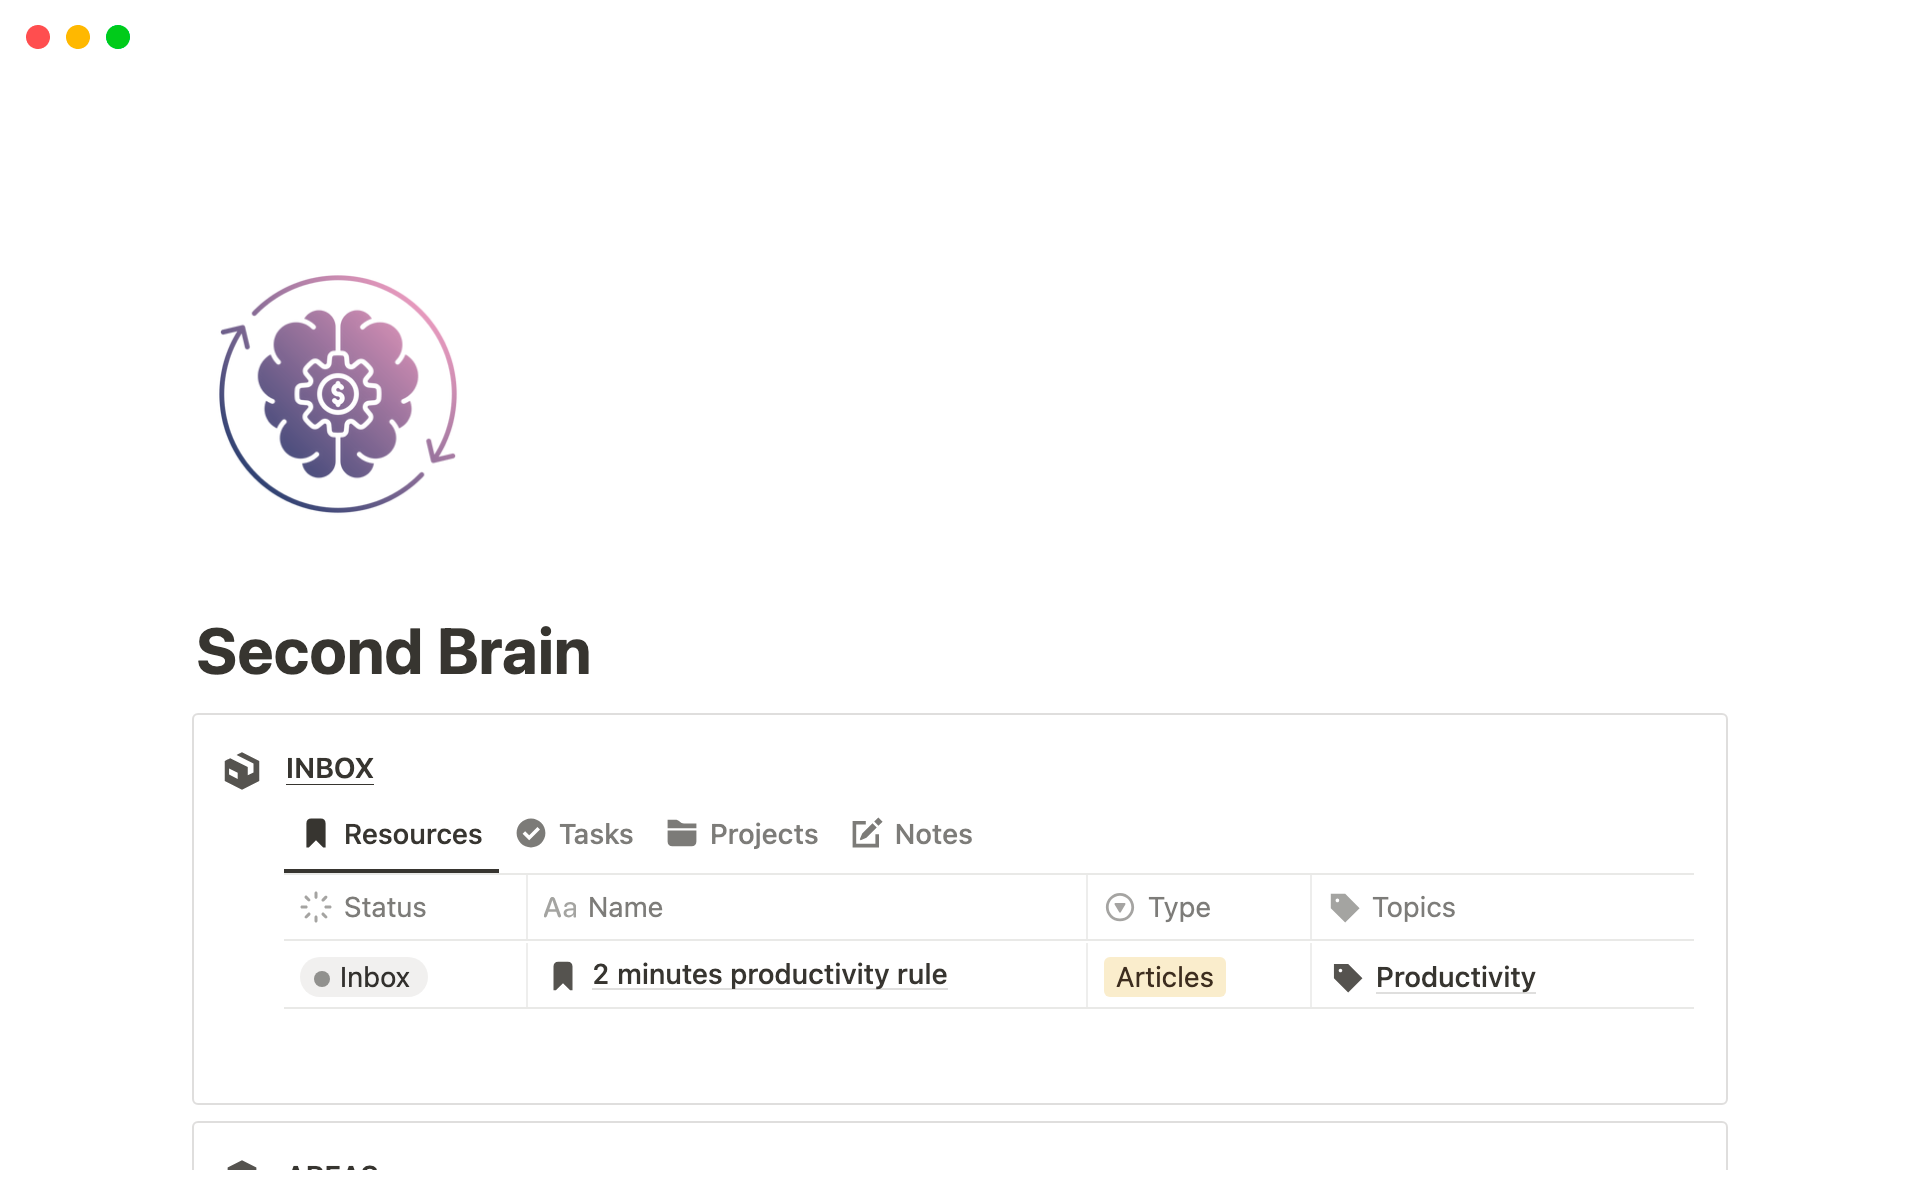 Second Brain is a Notion system that helps you capture your notes, tasks, projects, and resources in one central hub.